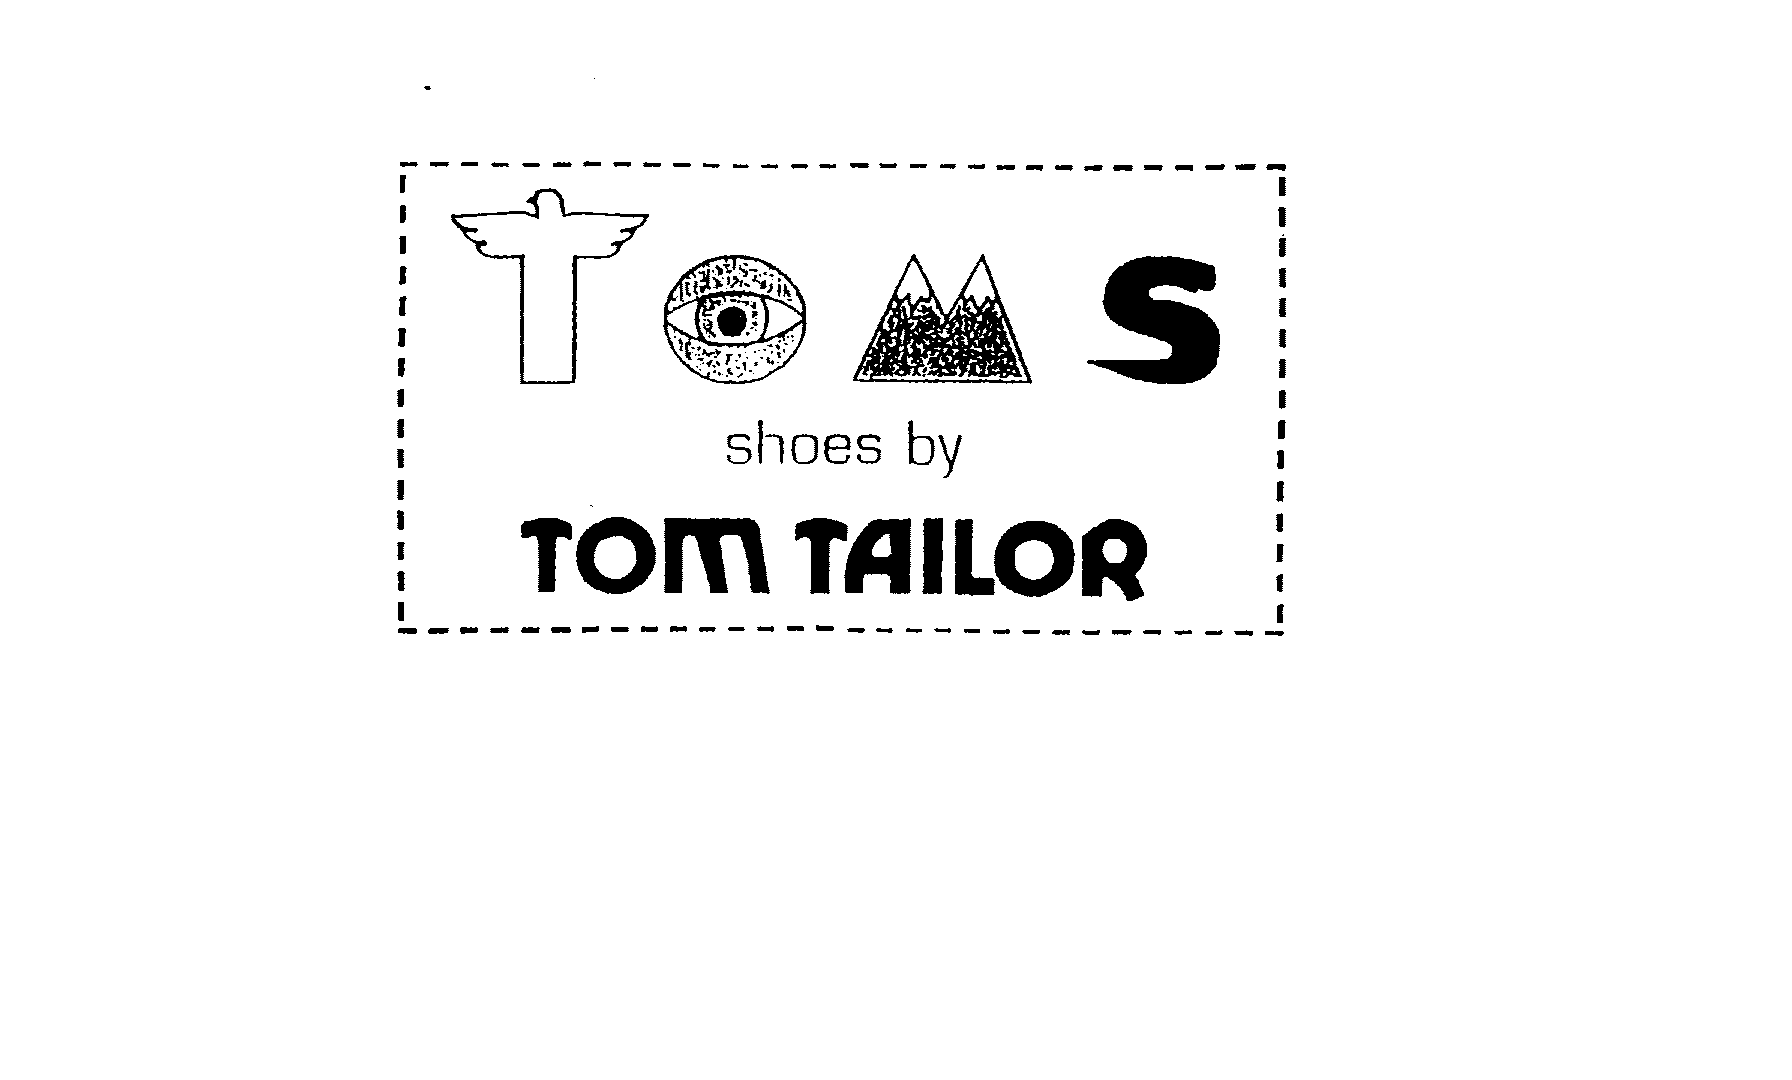  TOMS SHOES BY TOM TAILOR